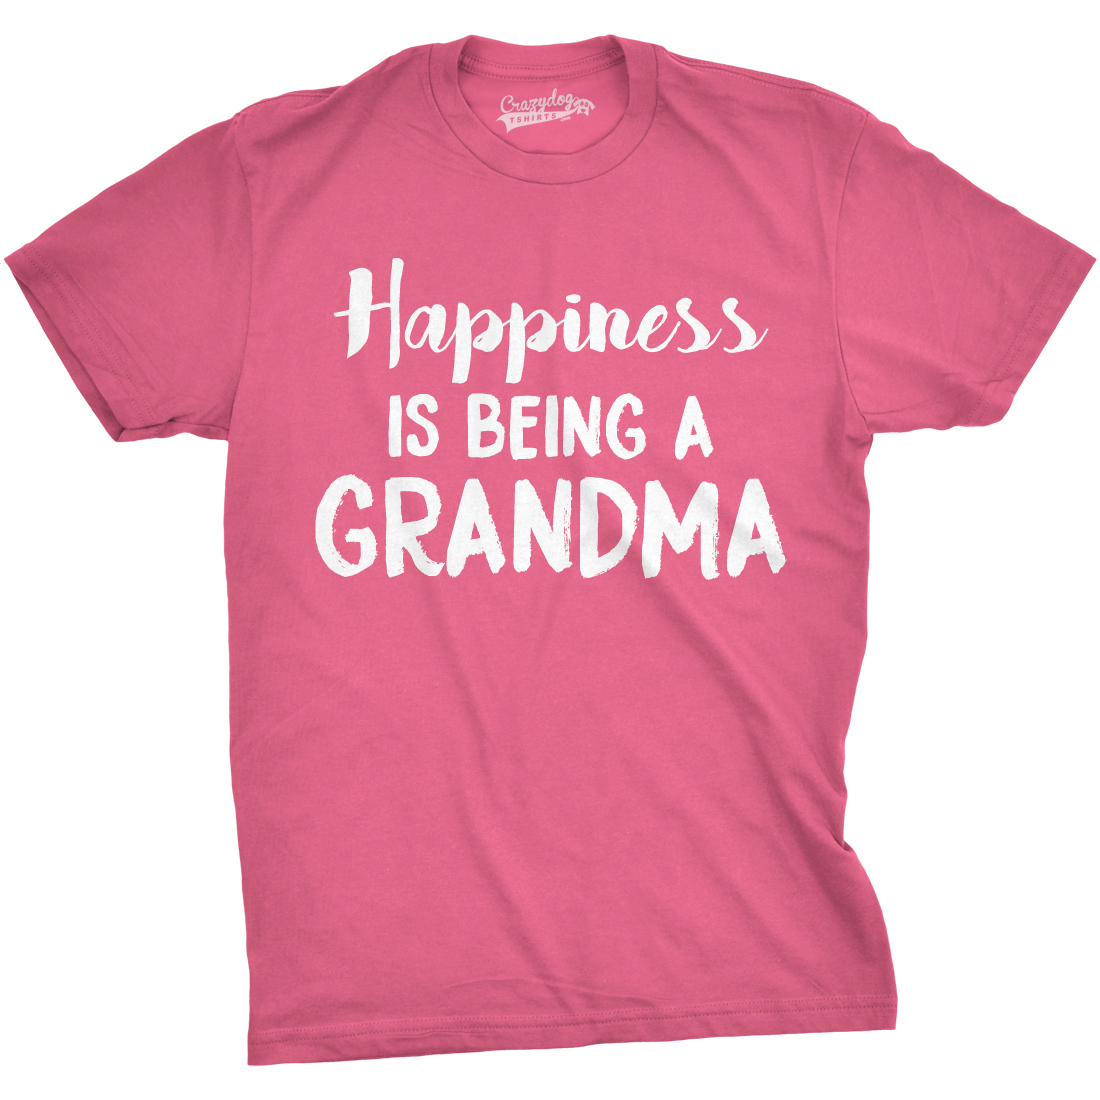 Happiness Is Being a Grandma Unisex Fit T shirts Gift Idea Funny Family T shirt Graphic Tees - image 1 of 8